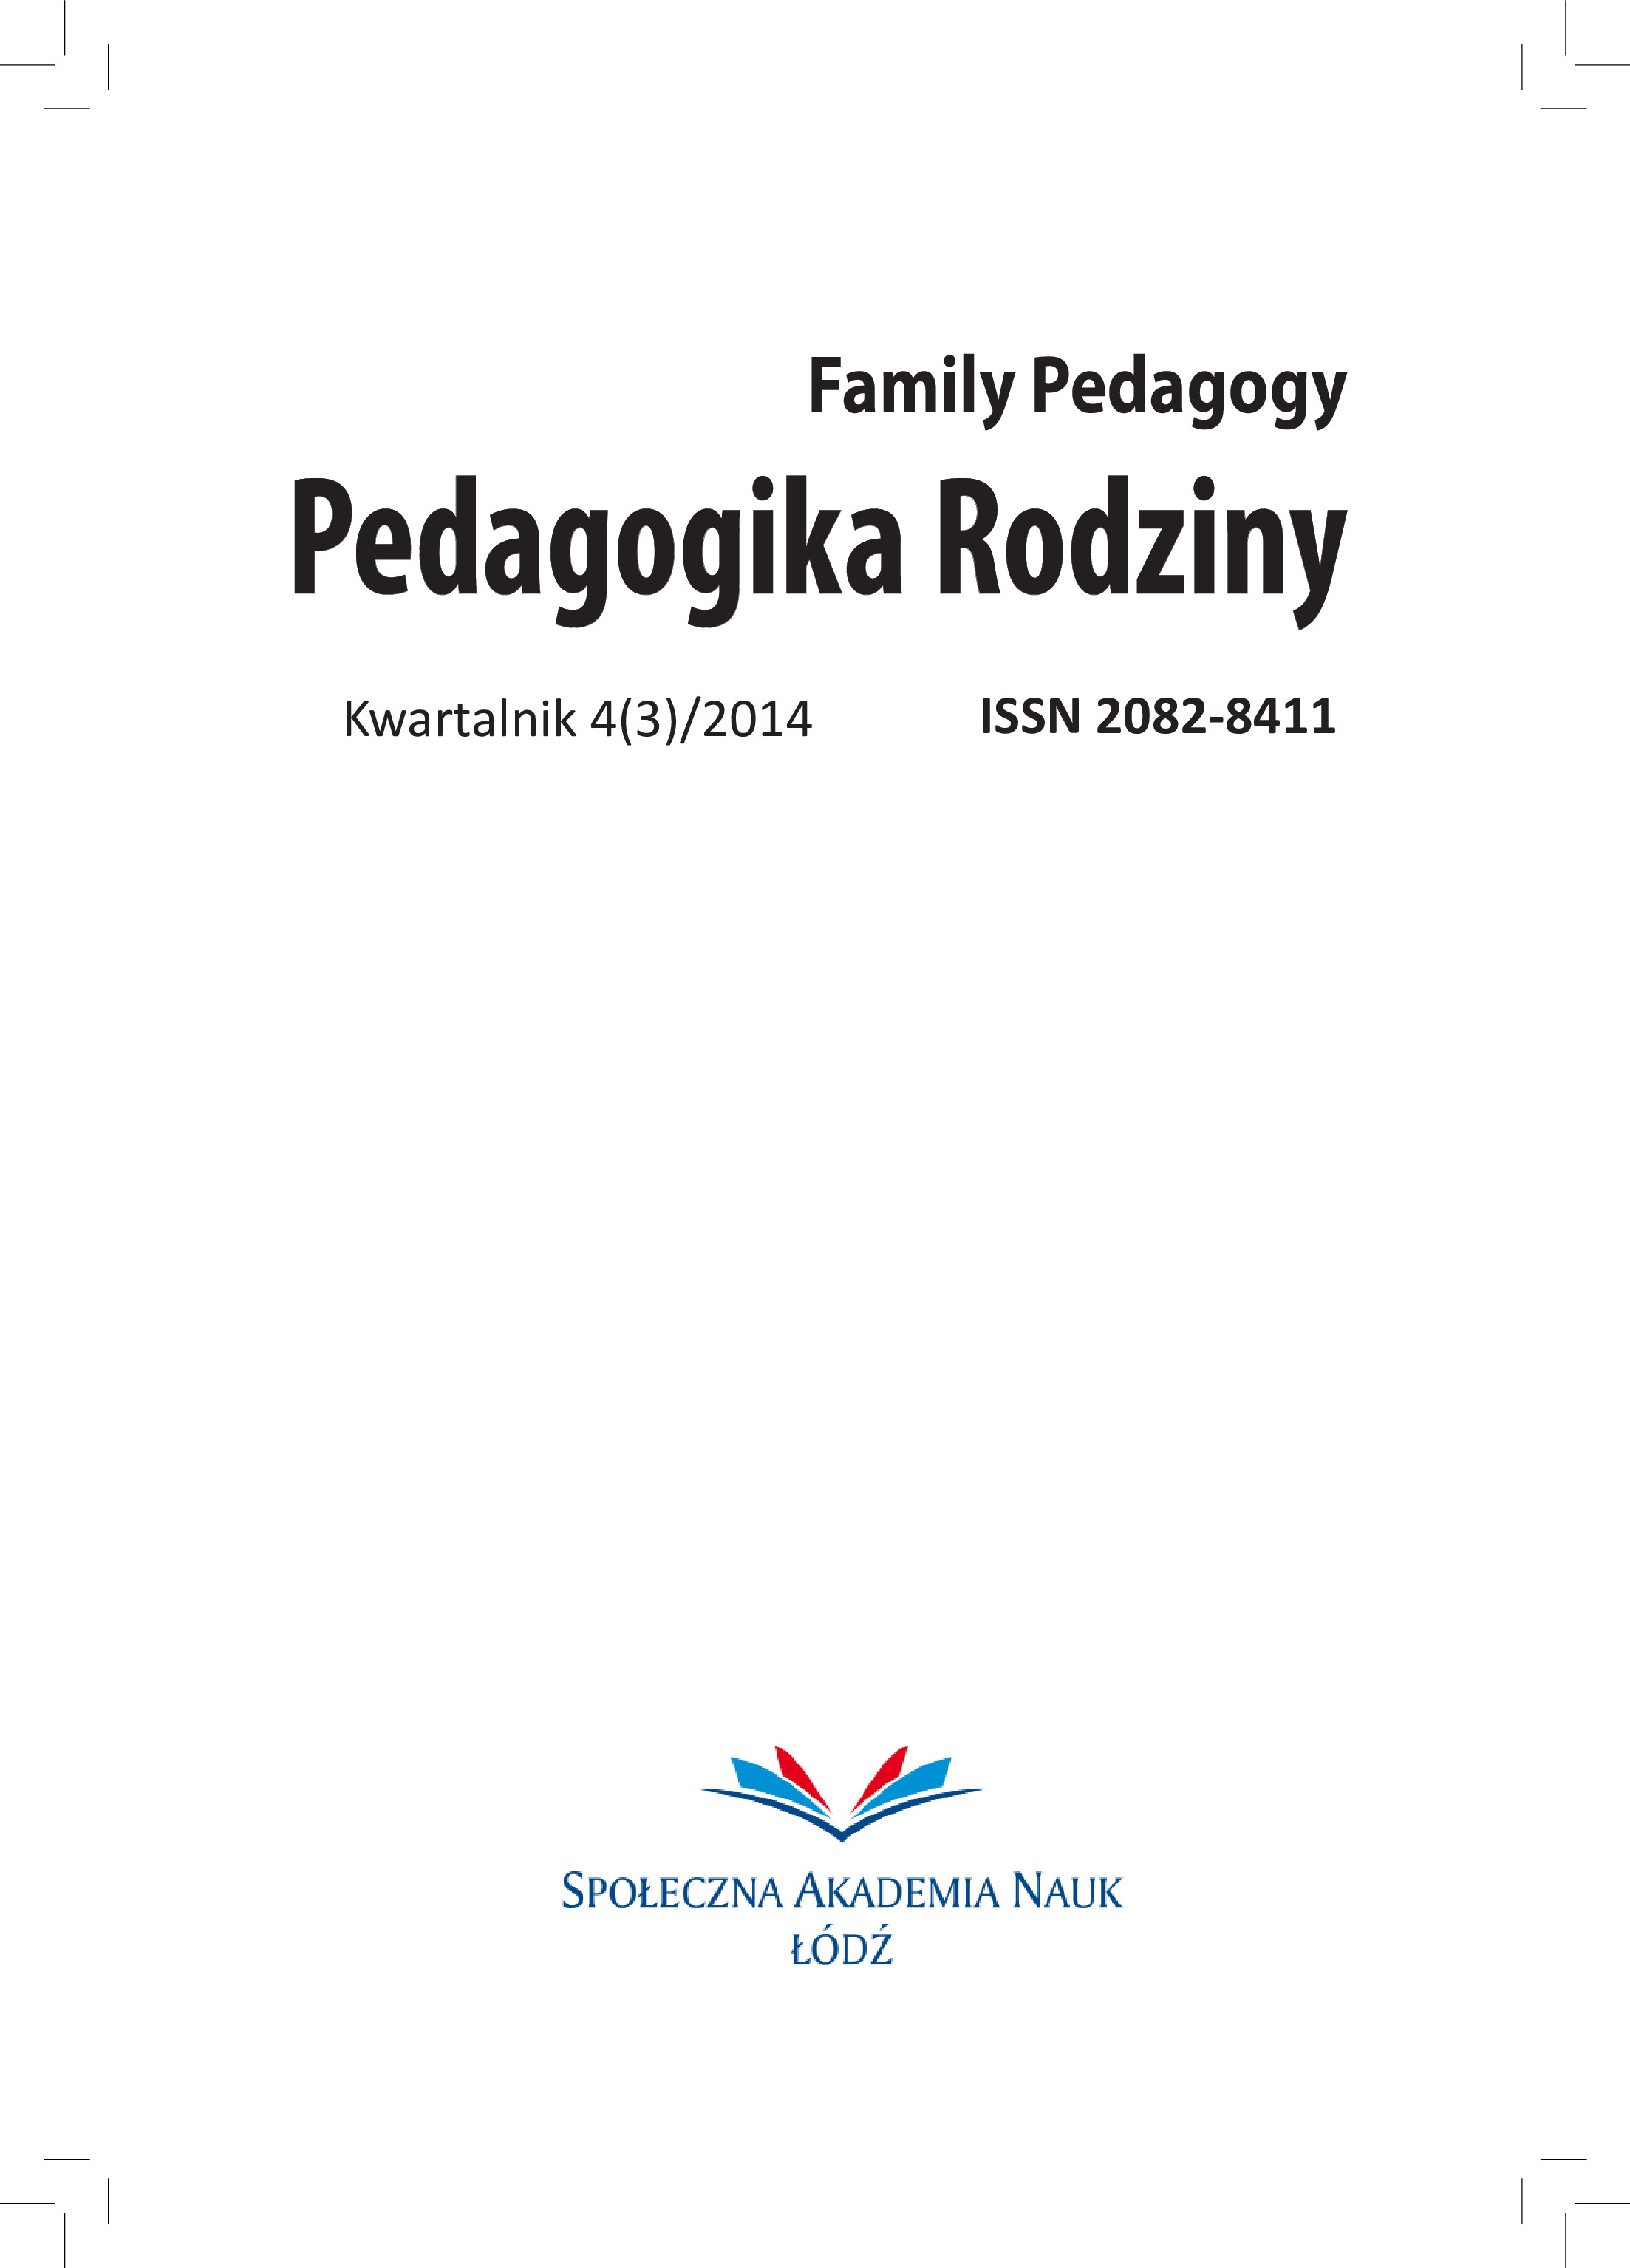 The creating culture features of  the modern family in Poland Cover Image